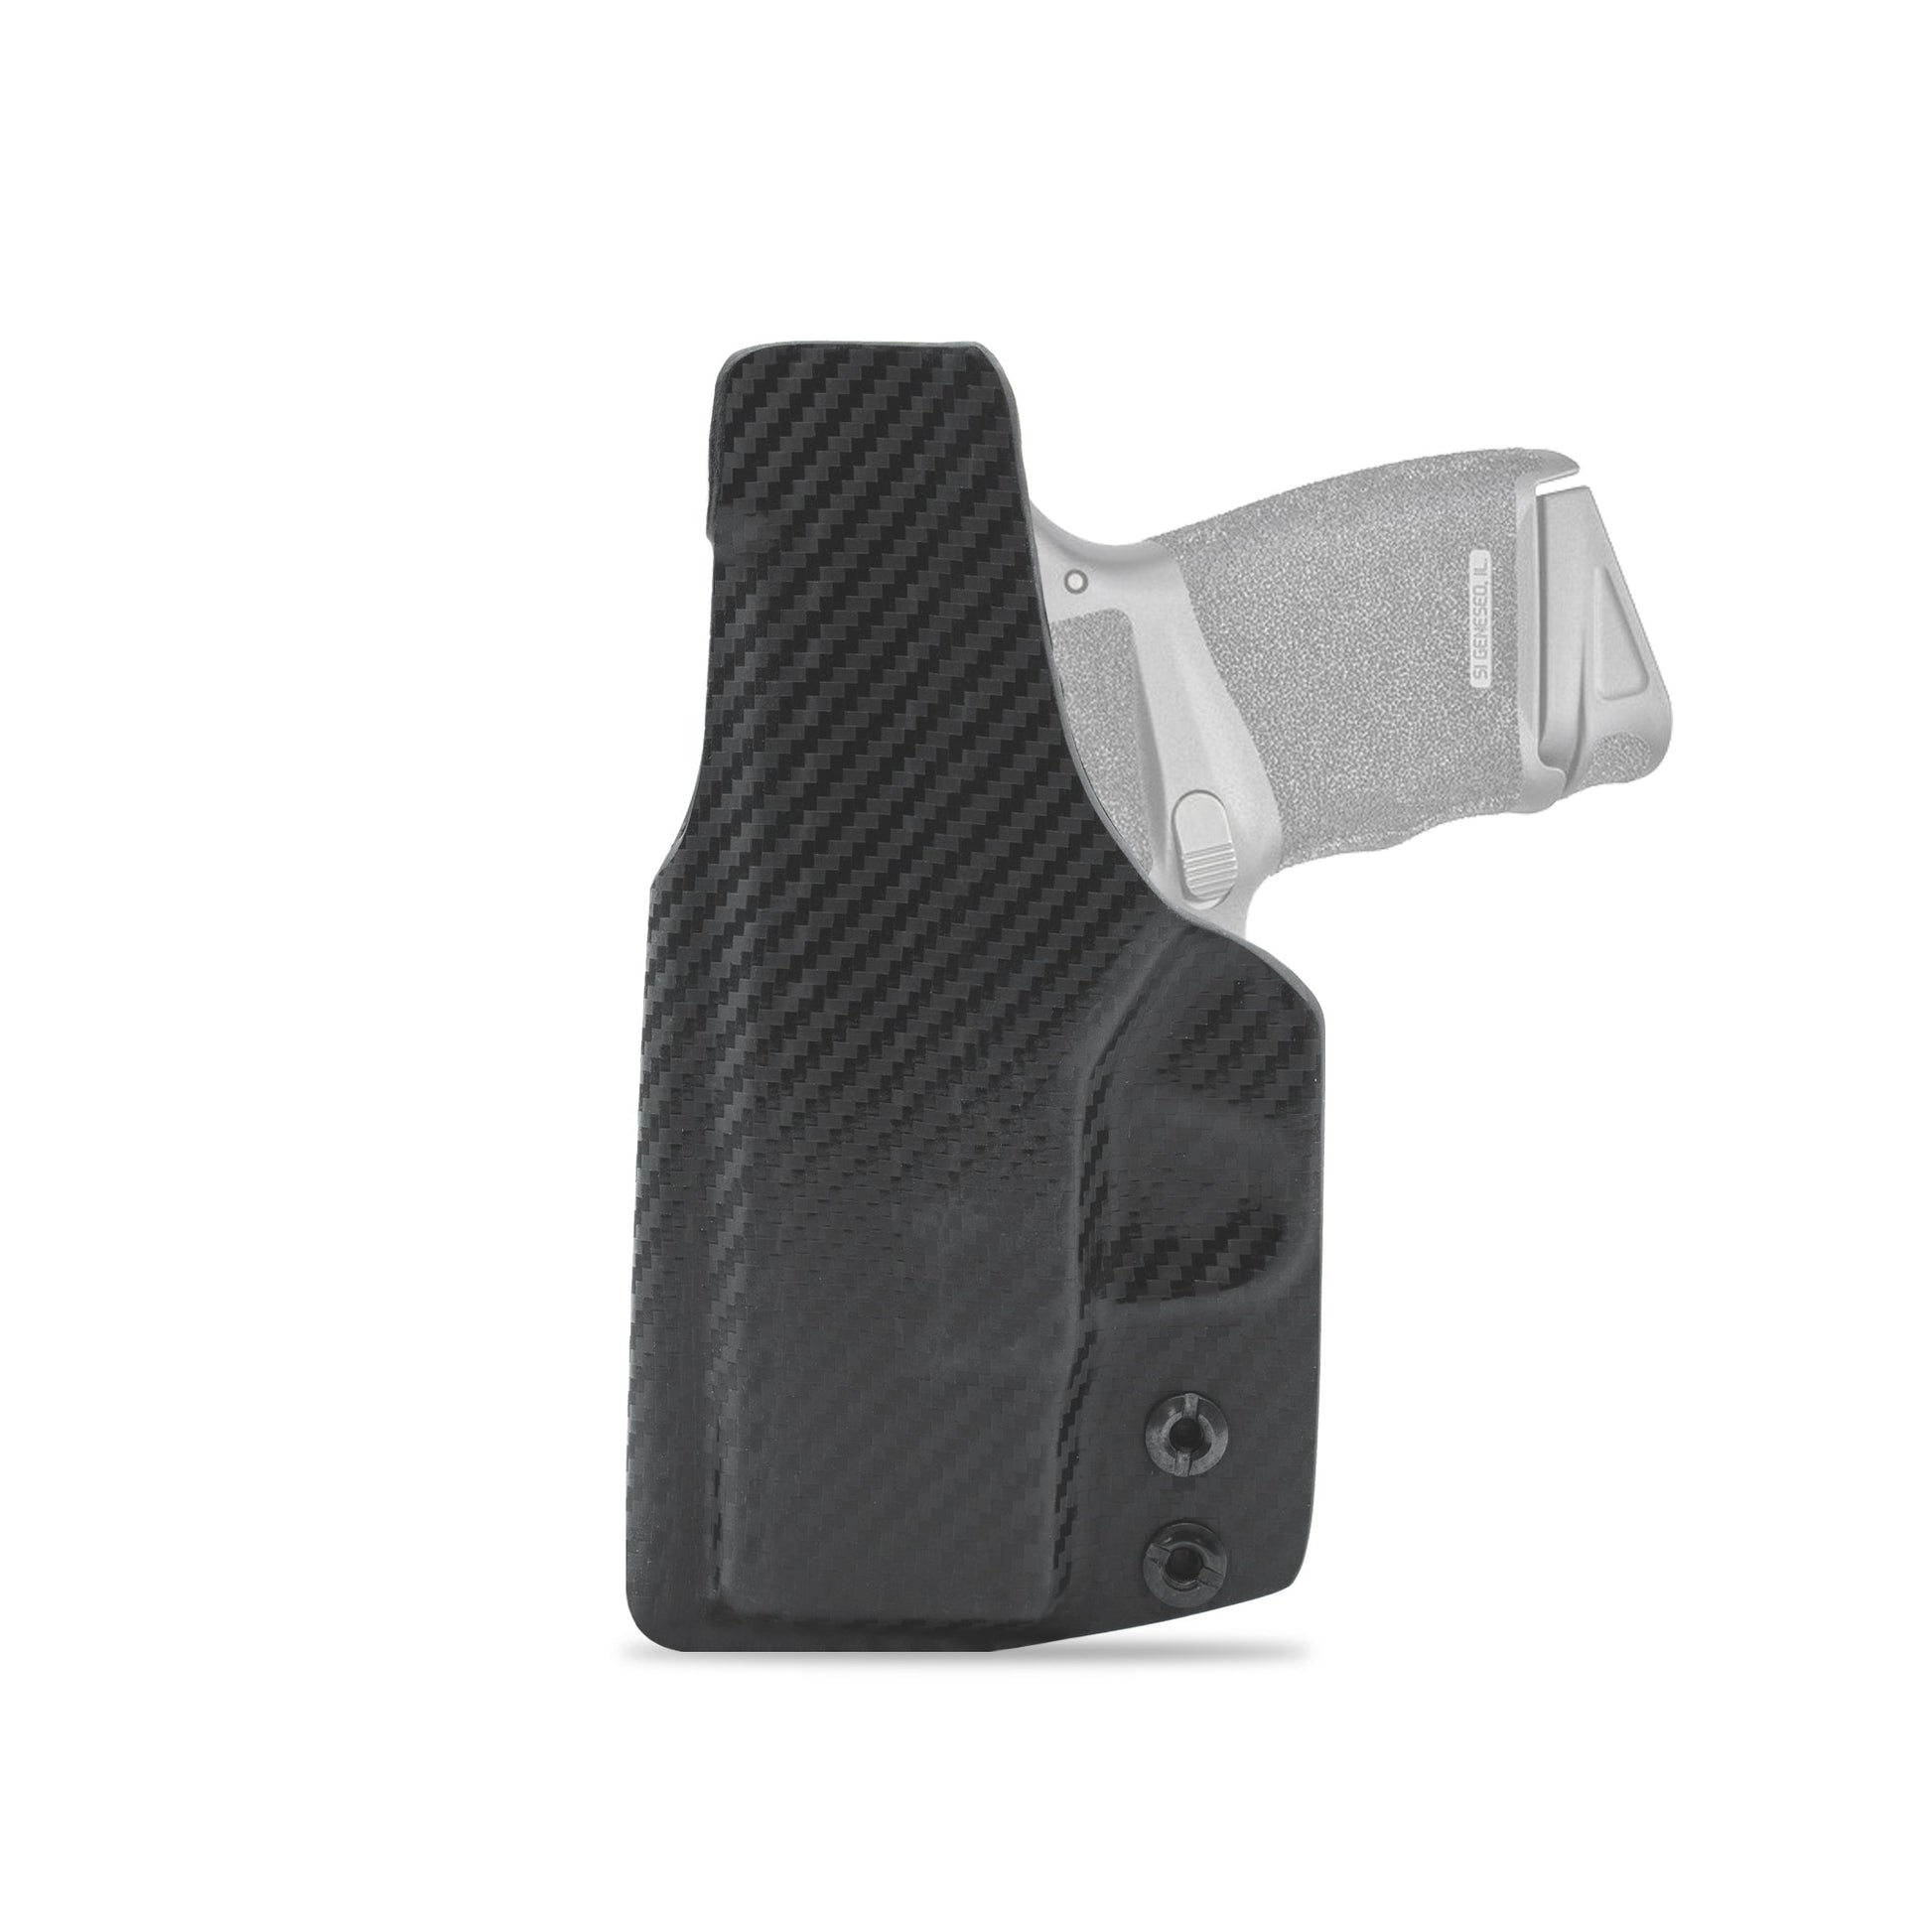 IWB Holster for the Springfield Hellcat, Hellcat OSP 9mm Clip & Carry